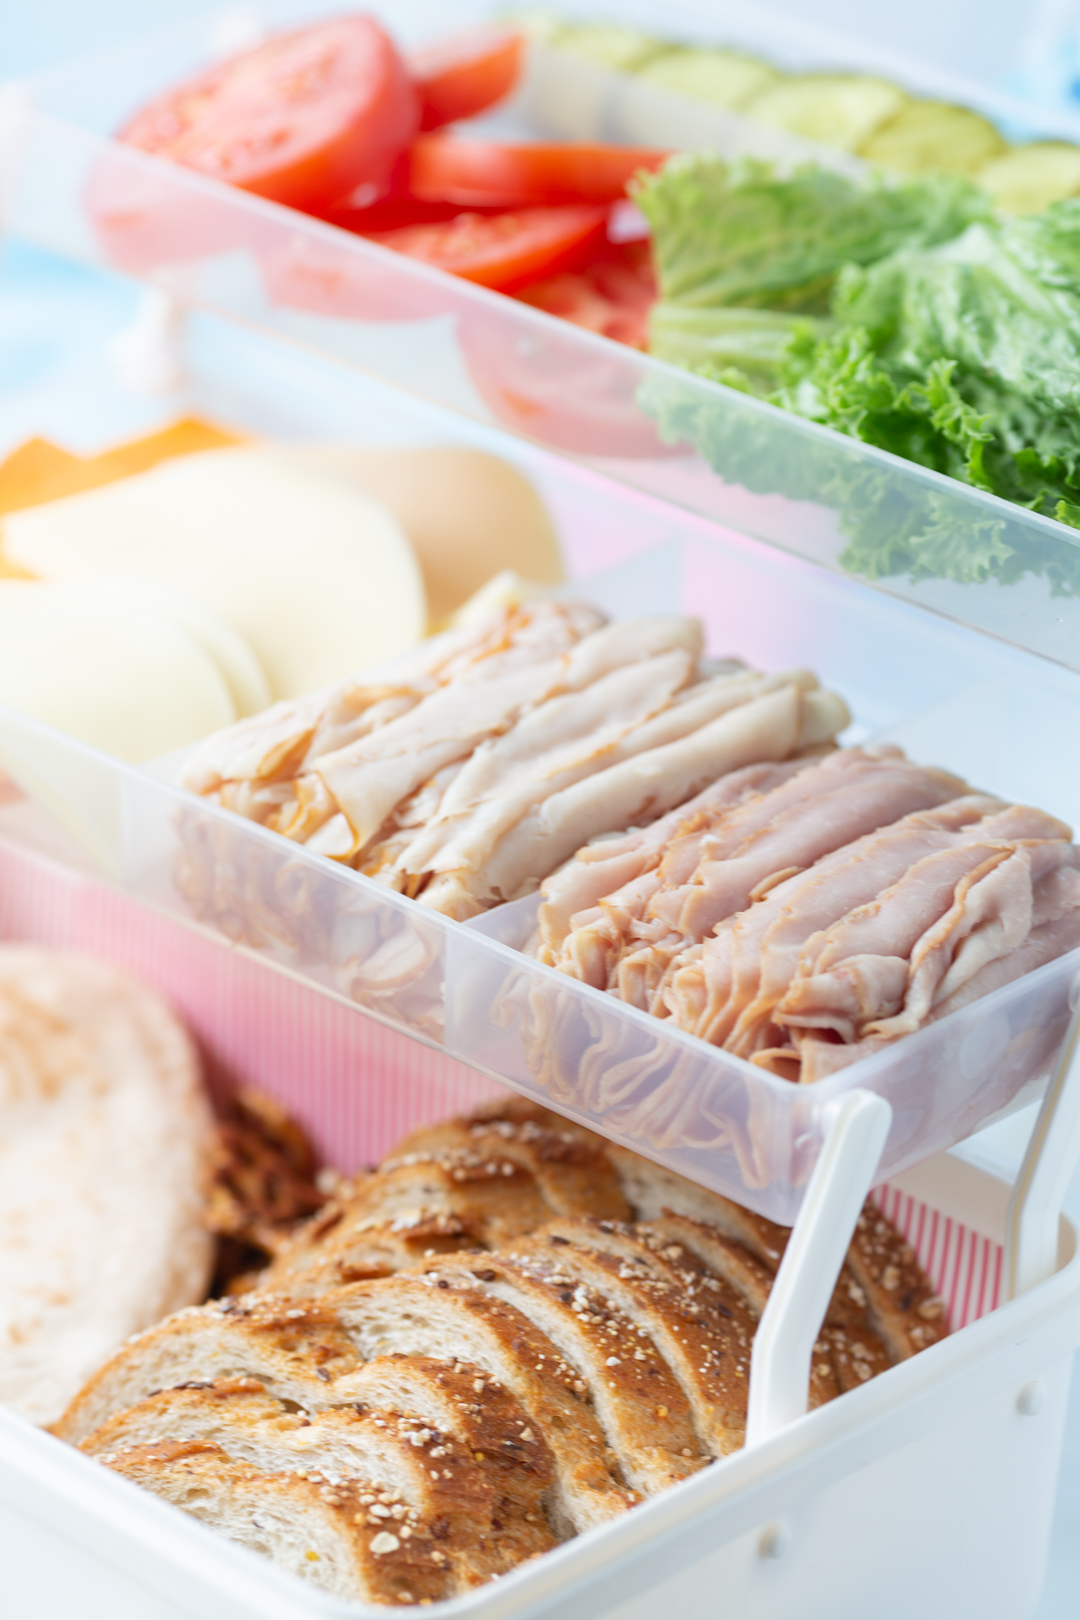 Move over Snackle Box, it's Sandwich Tackle Box Time